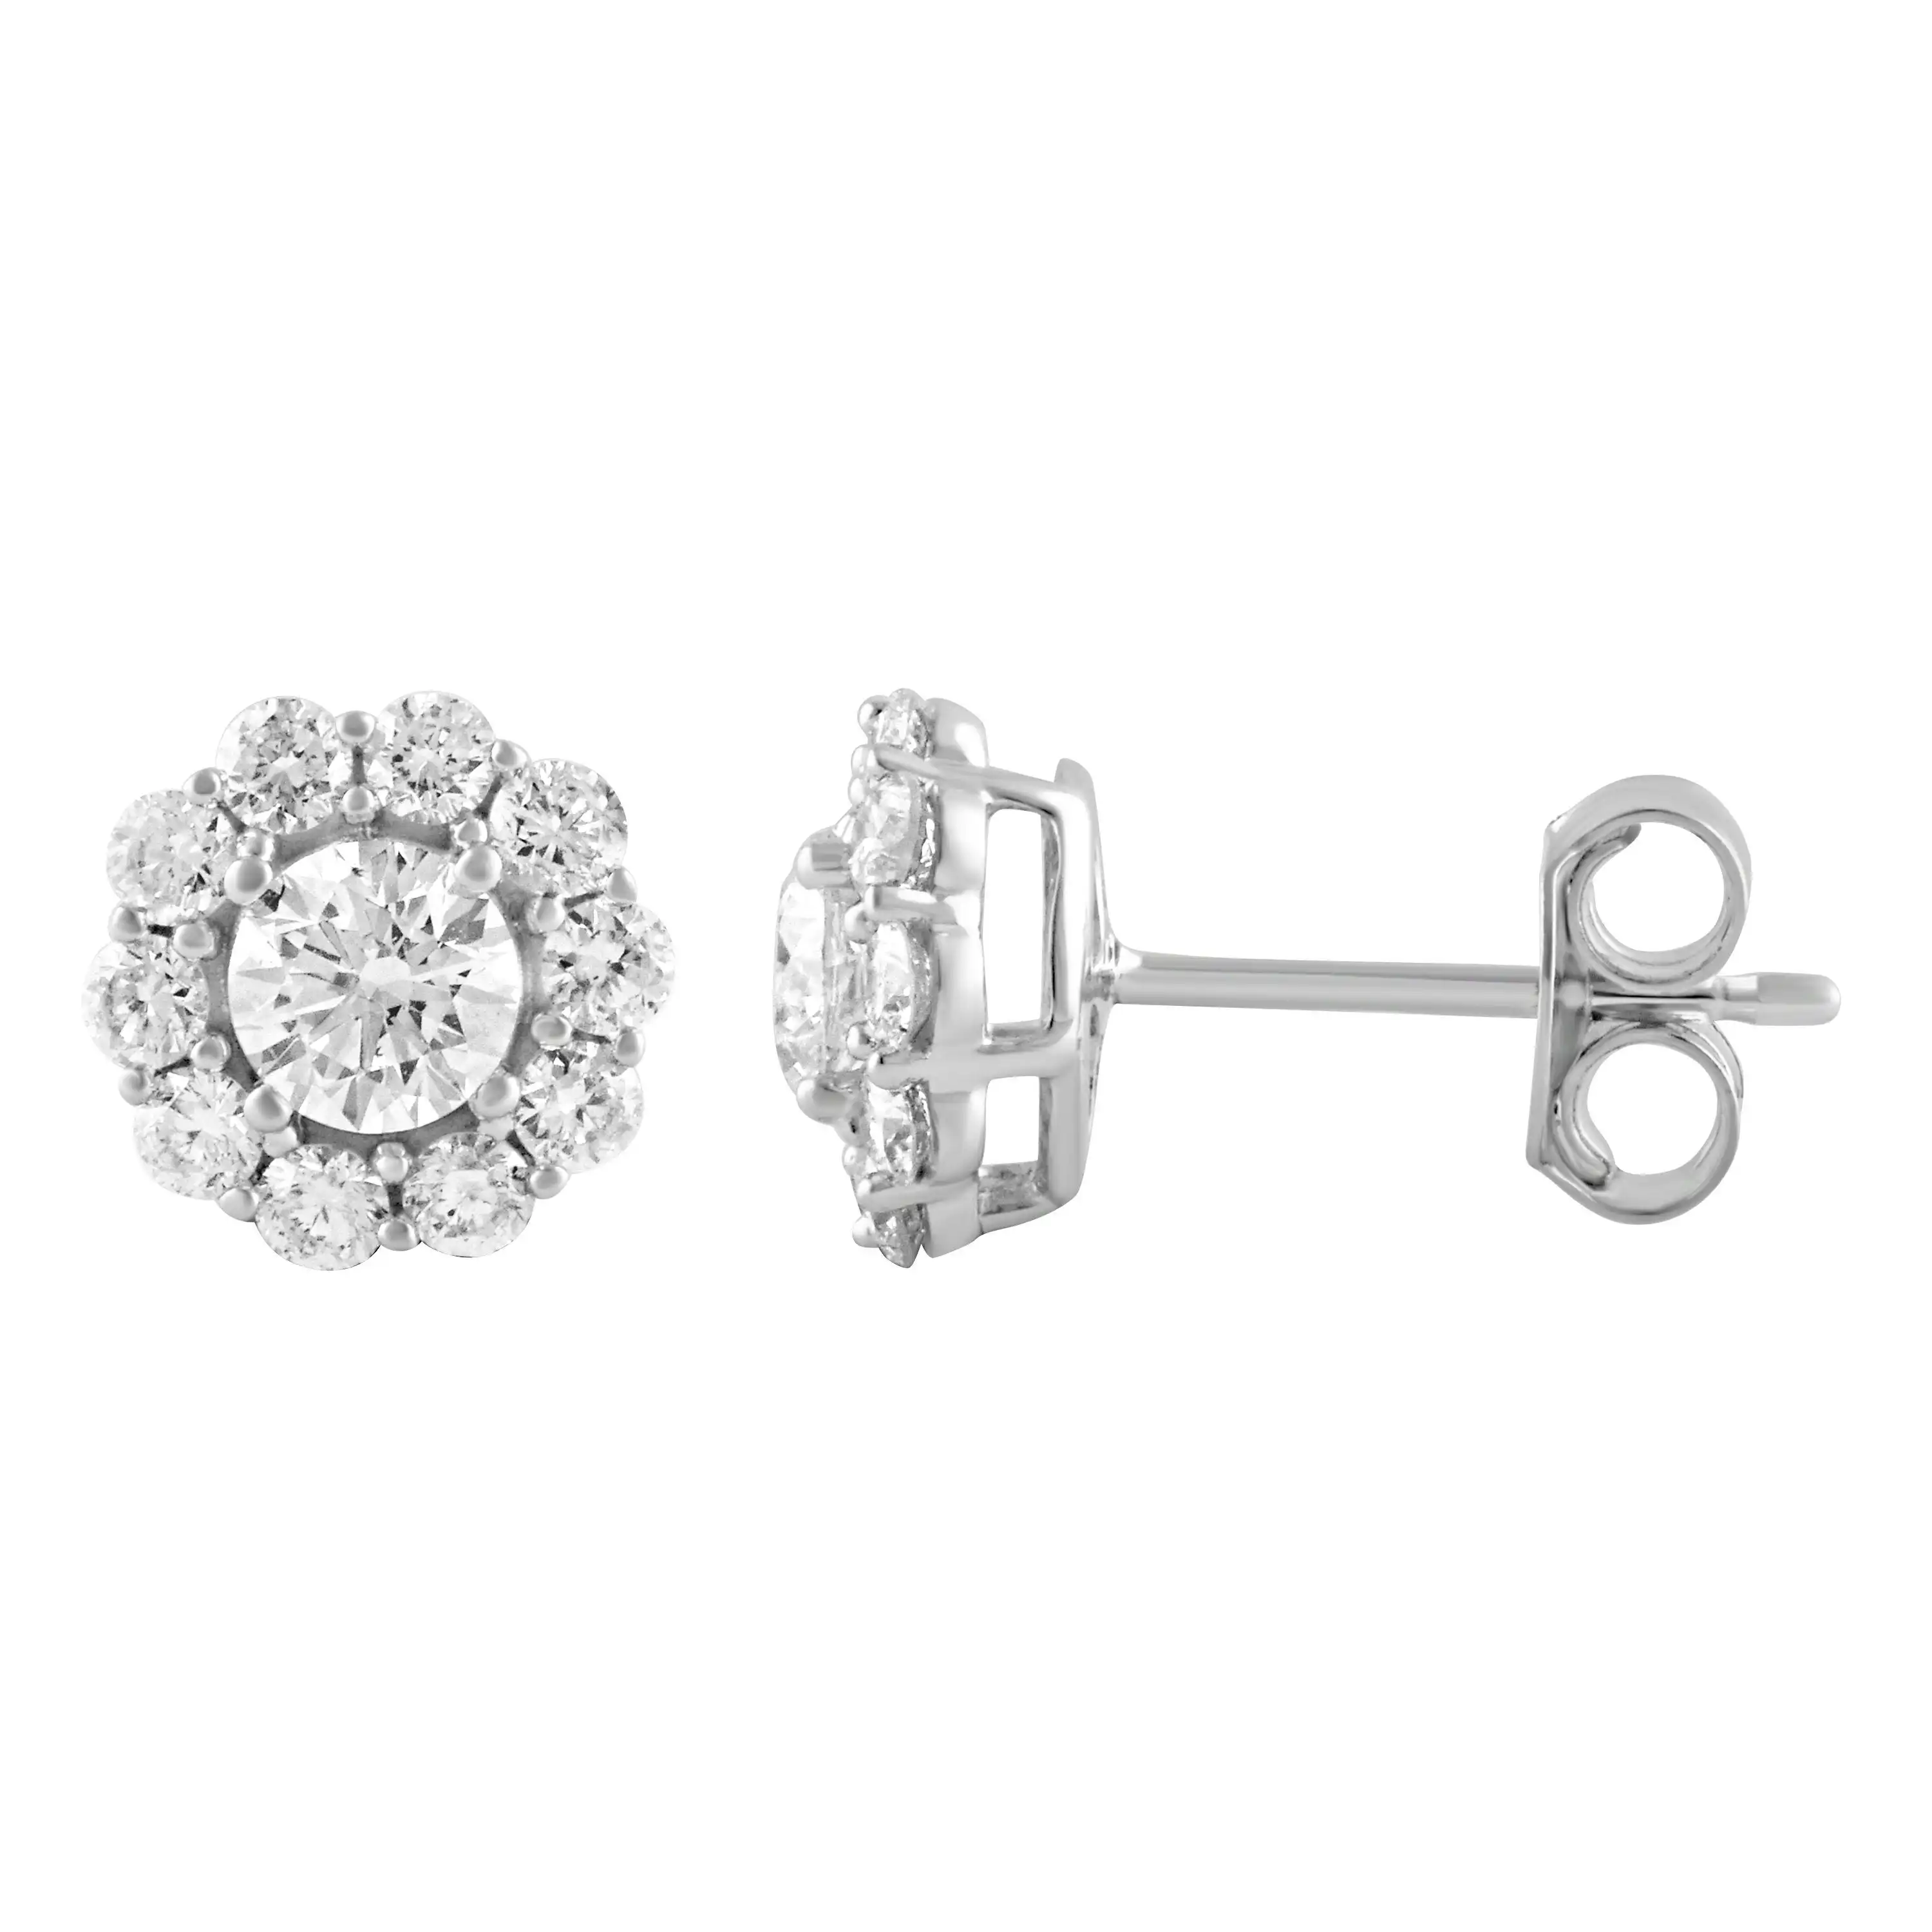 Meera Halo Stud Earrings with 1.00ct of Laboratory Grown Diamonds in 9ct White Gold